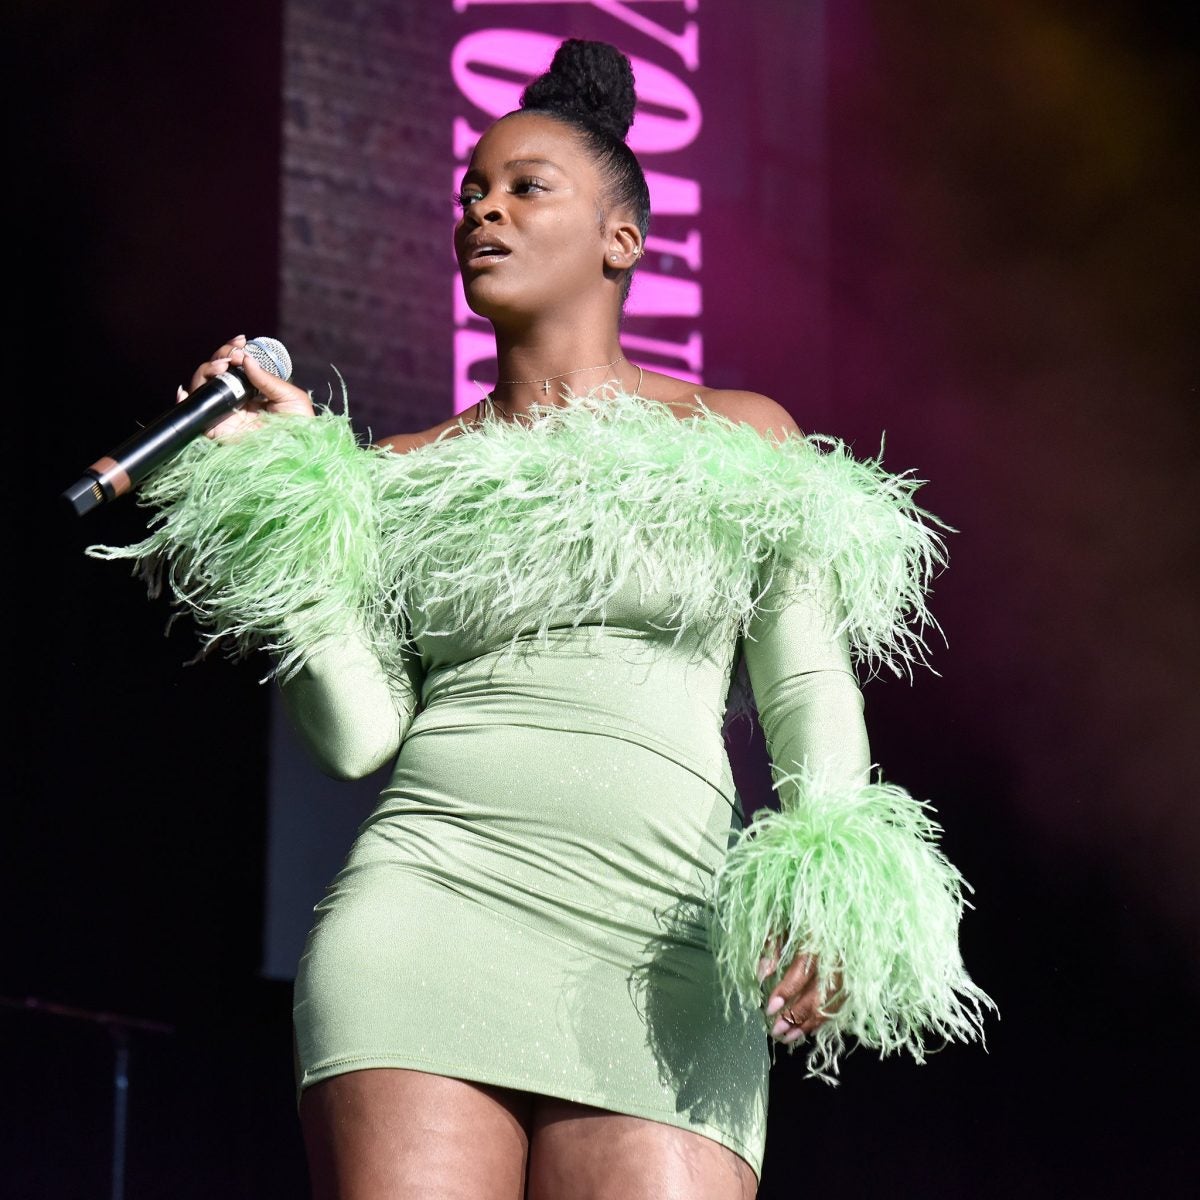 Ari Lennox Gets Candid About Her Critics: 'I Literally Can't Be A Carefree Woman'